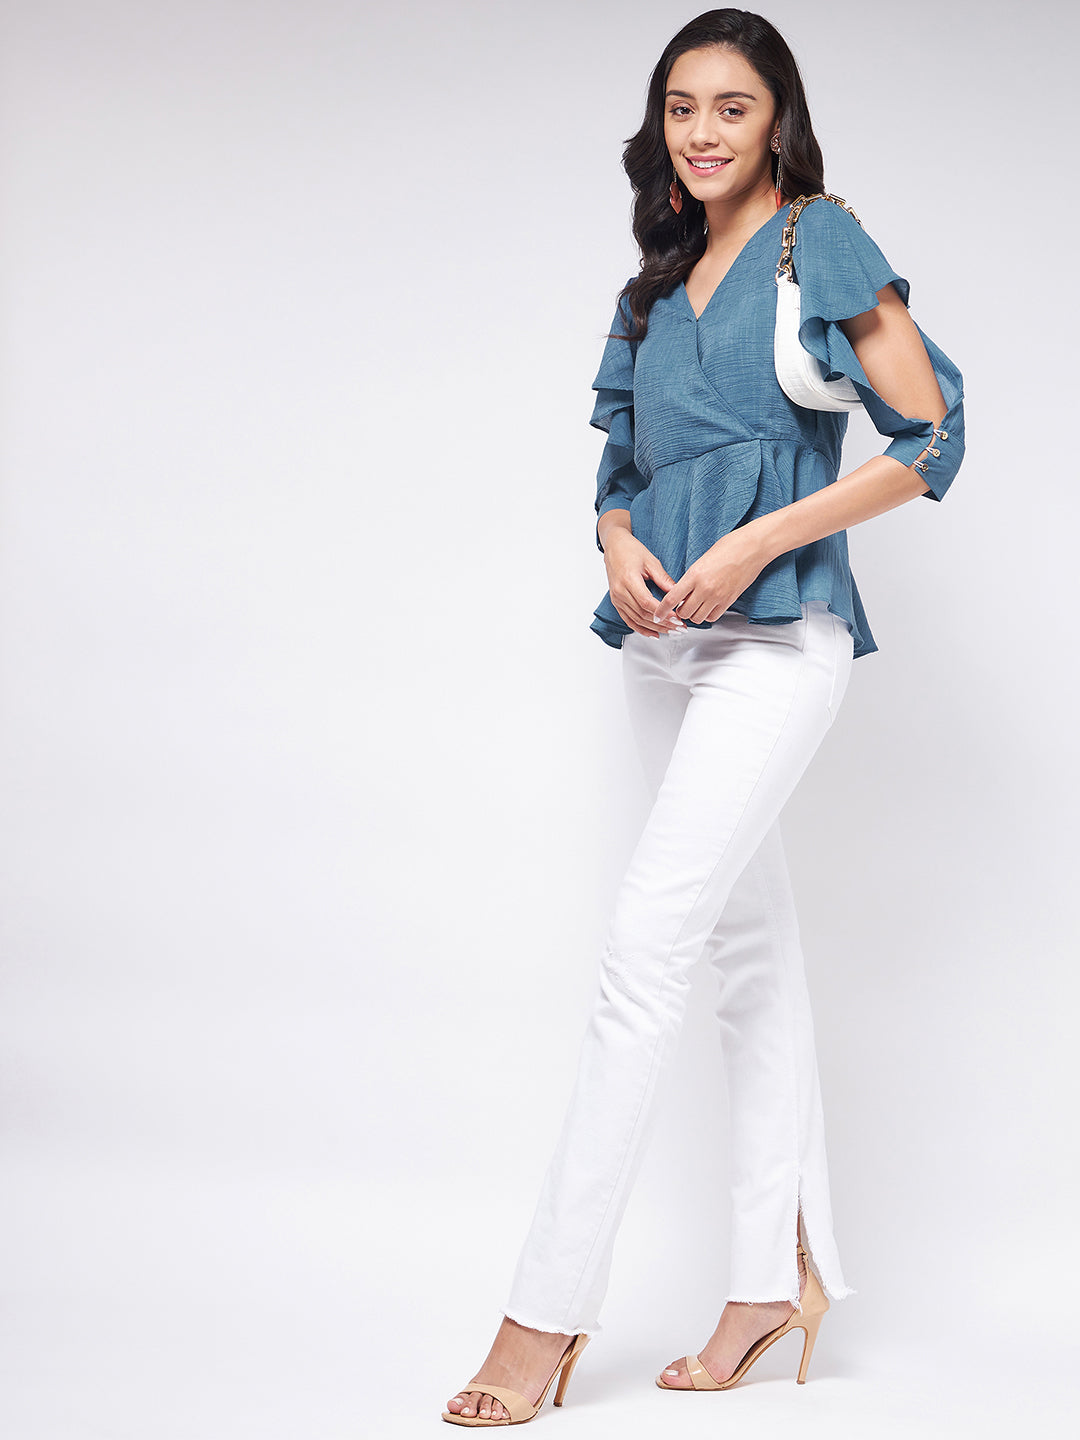 Flaunt Yourself In Solid Overlap Flared Sleeves Top